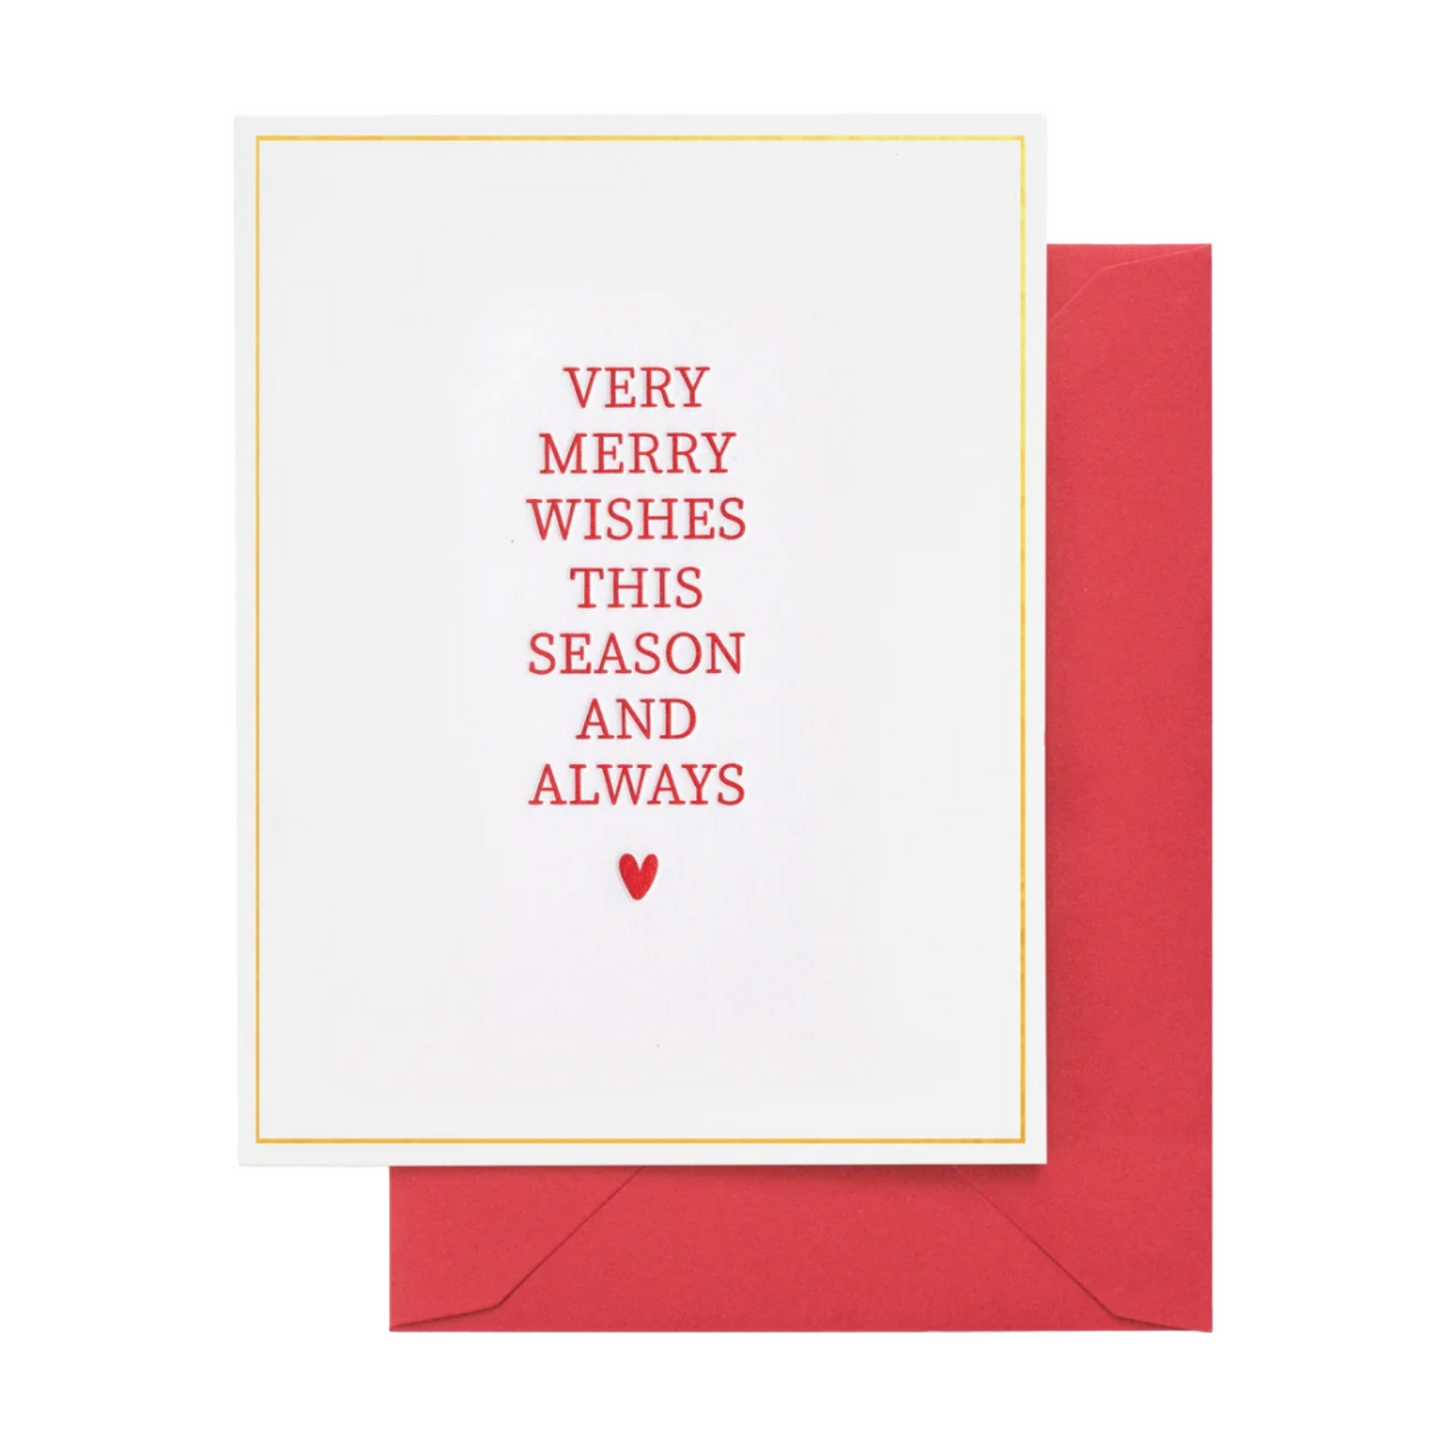 Very Merry Wishes Card by Sugar Paper